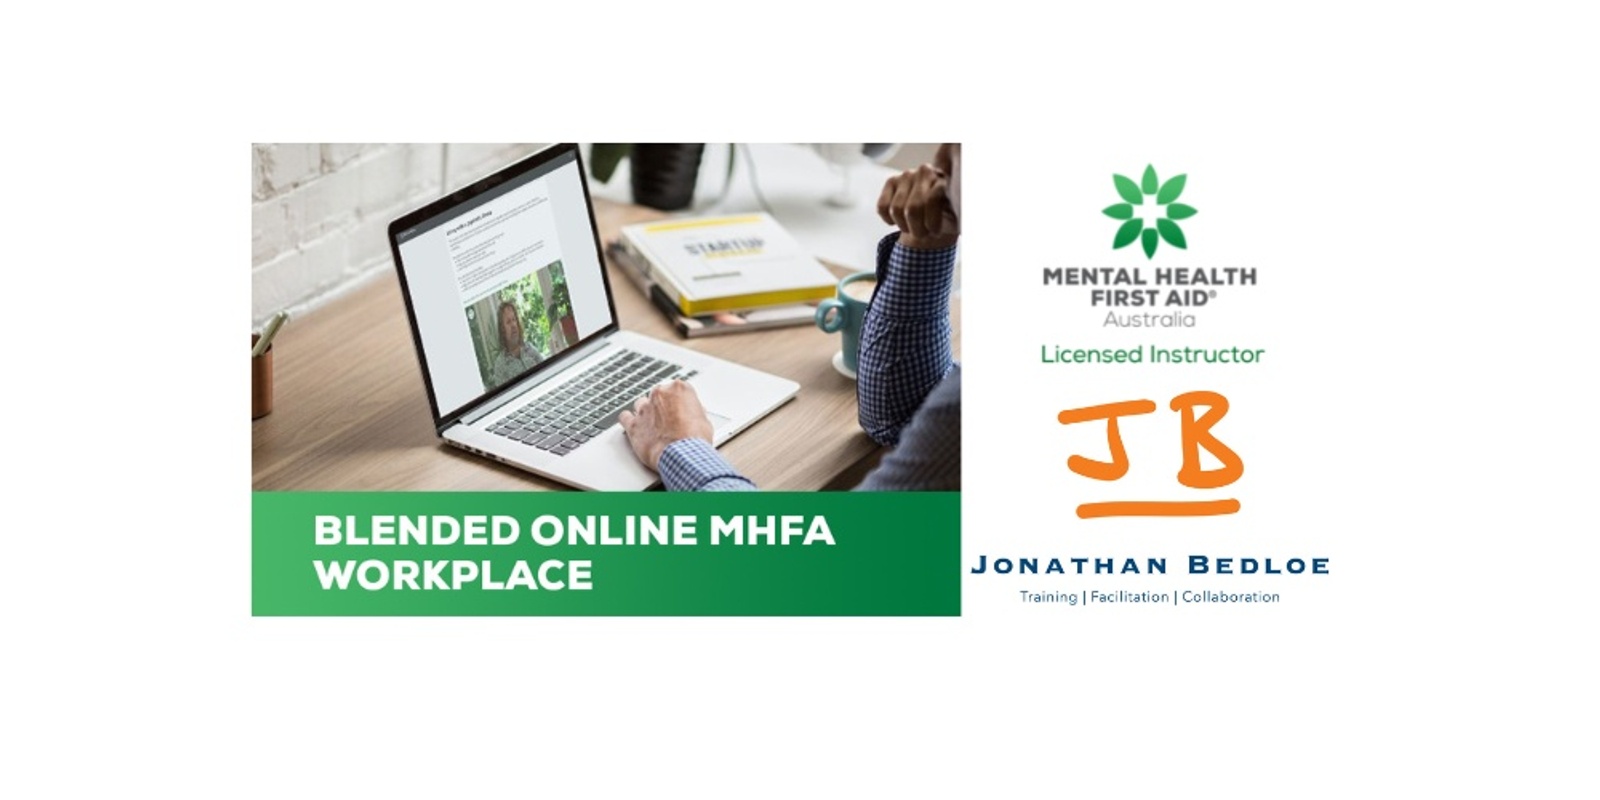 Mental Health First Aid - Blended online